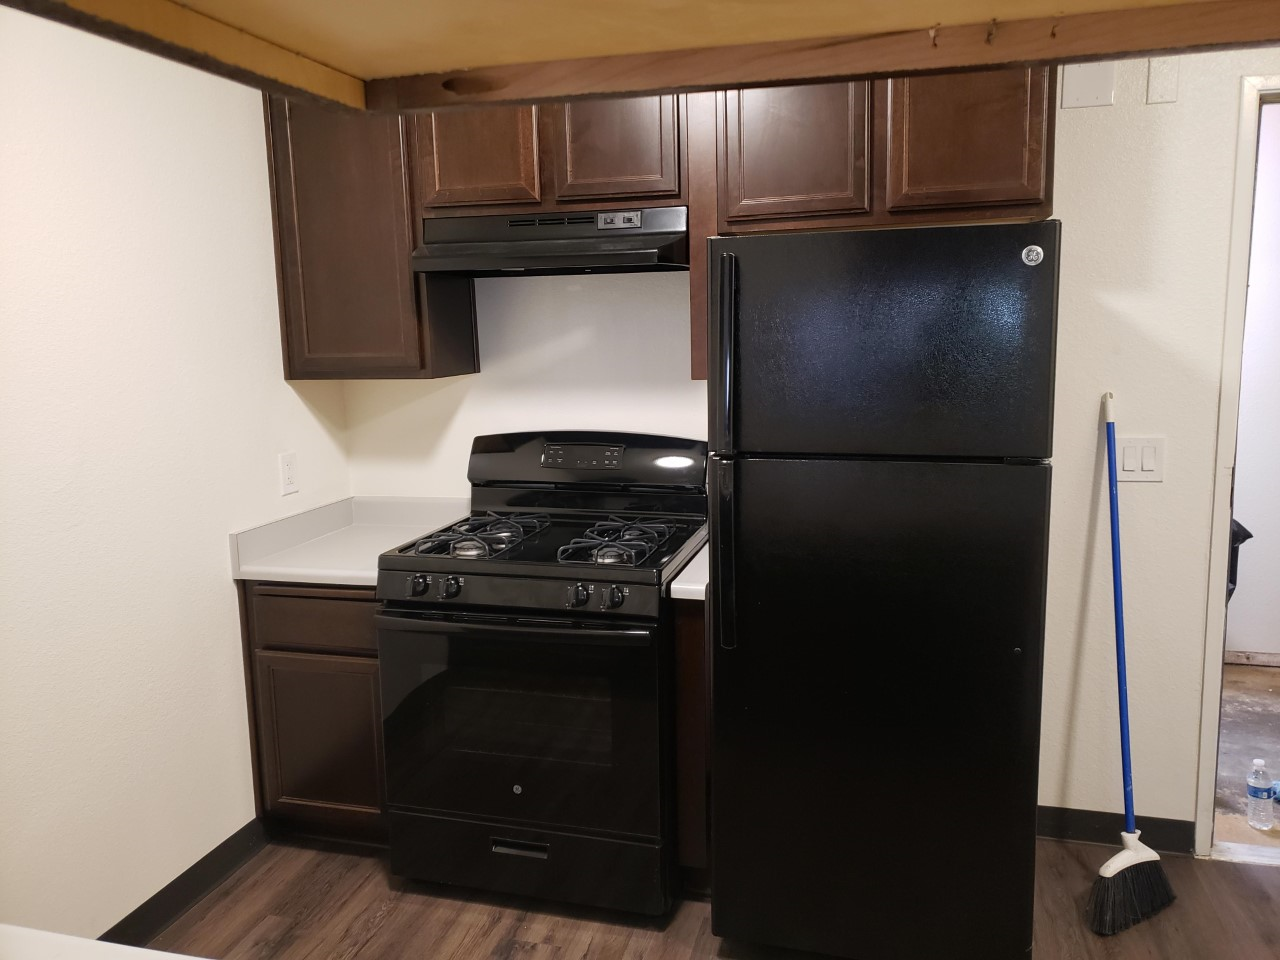 Image of the kitchen equipped with a fridge